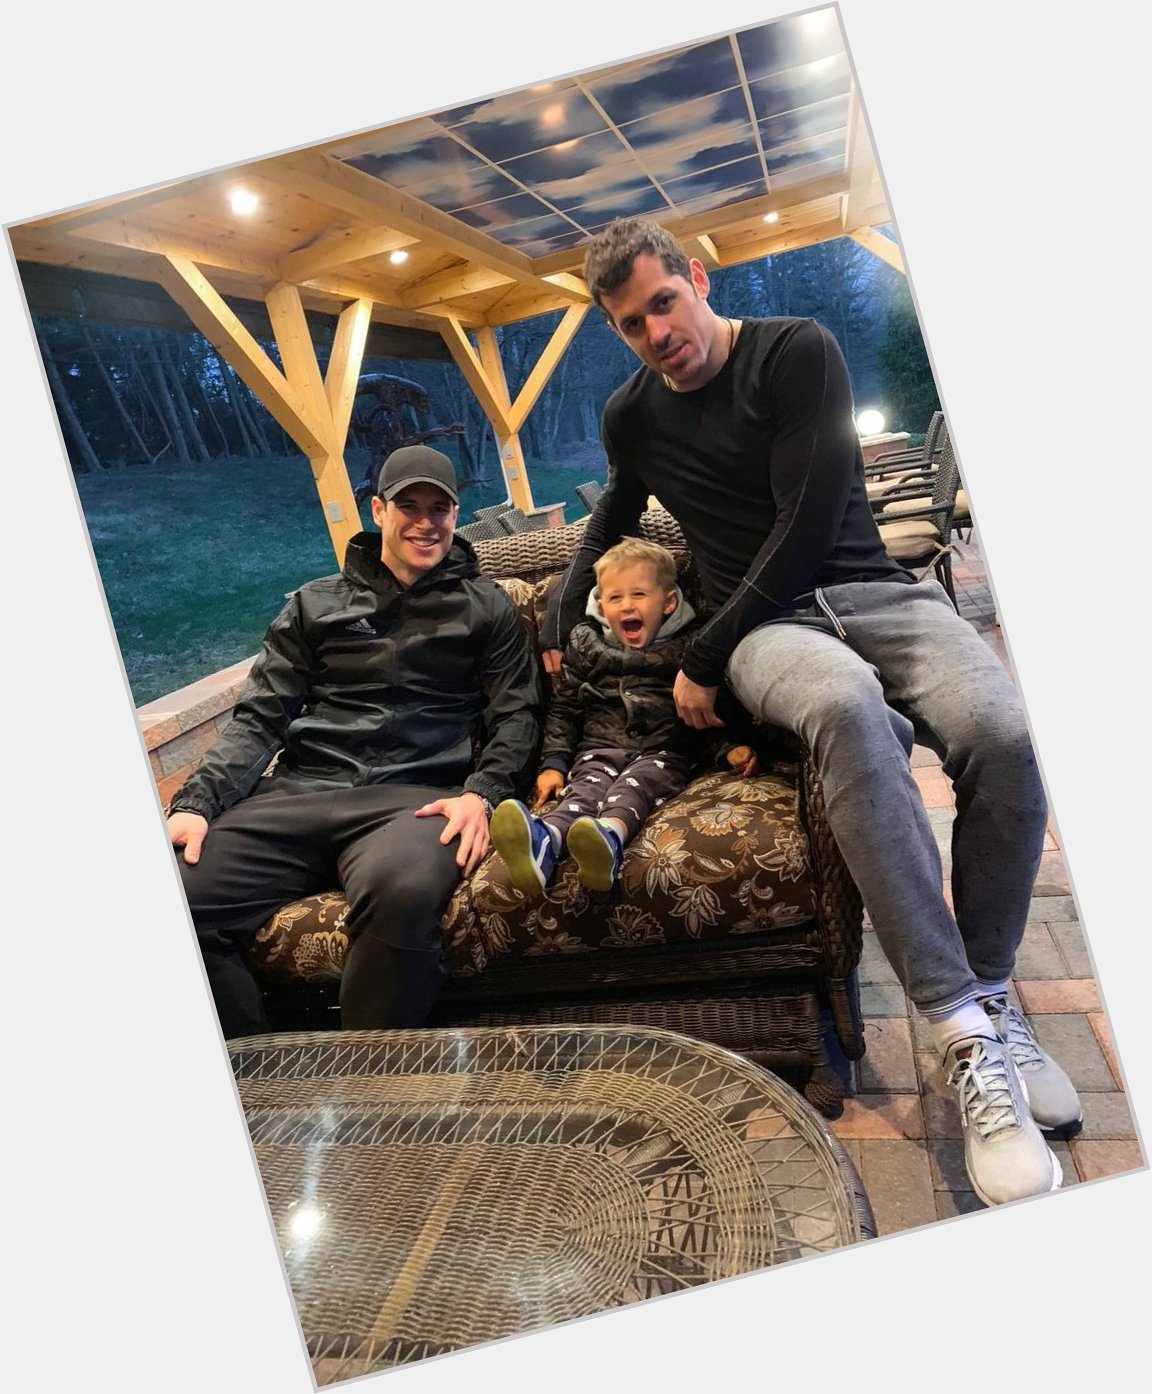 Evgeni Malkin\s wife Anna posted this today with \"Happy birthday Sid\" 

Happy Birthday Anna